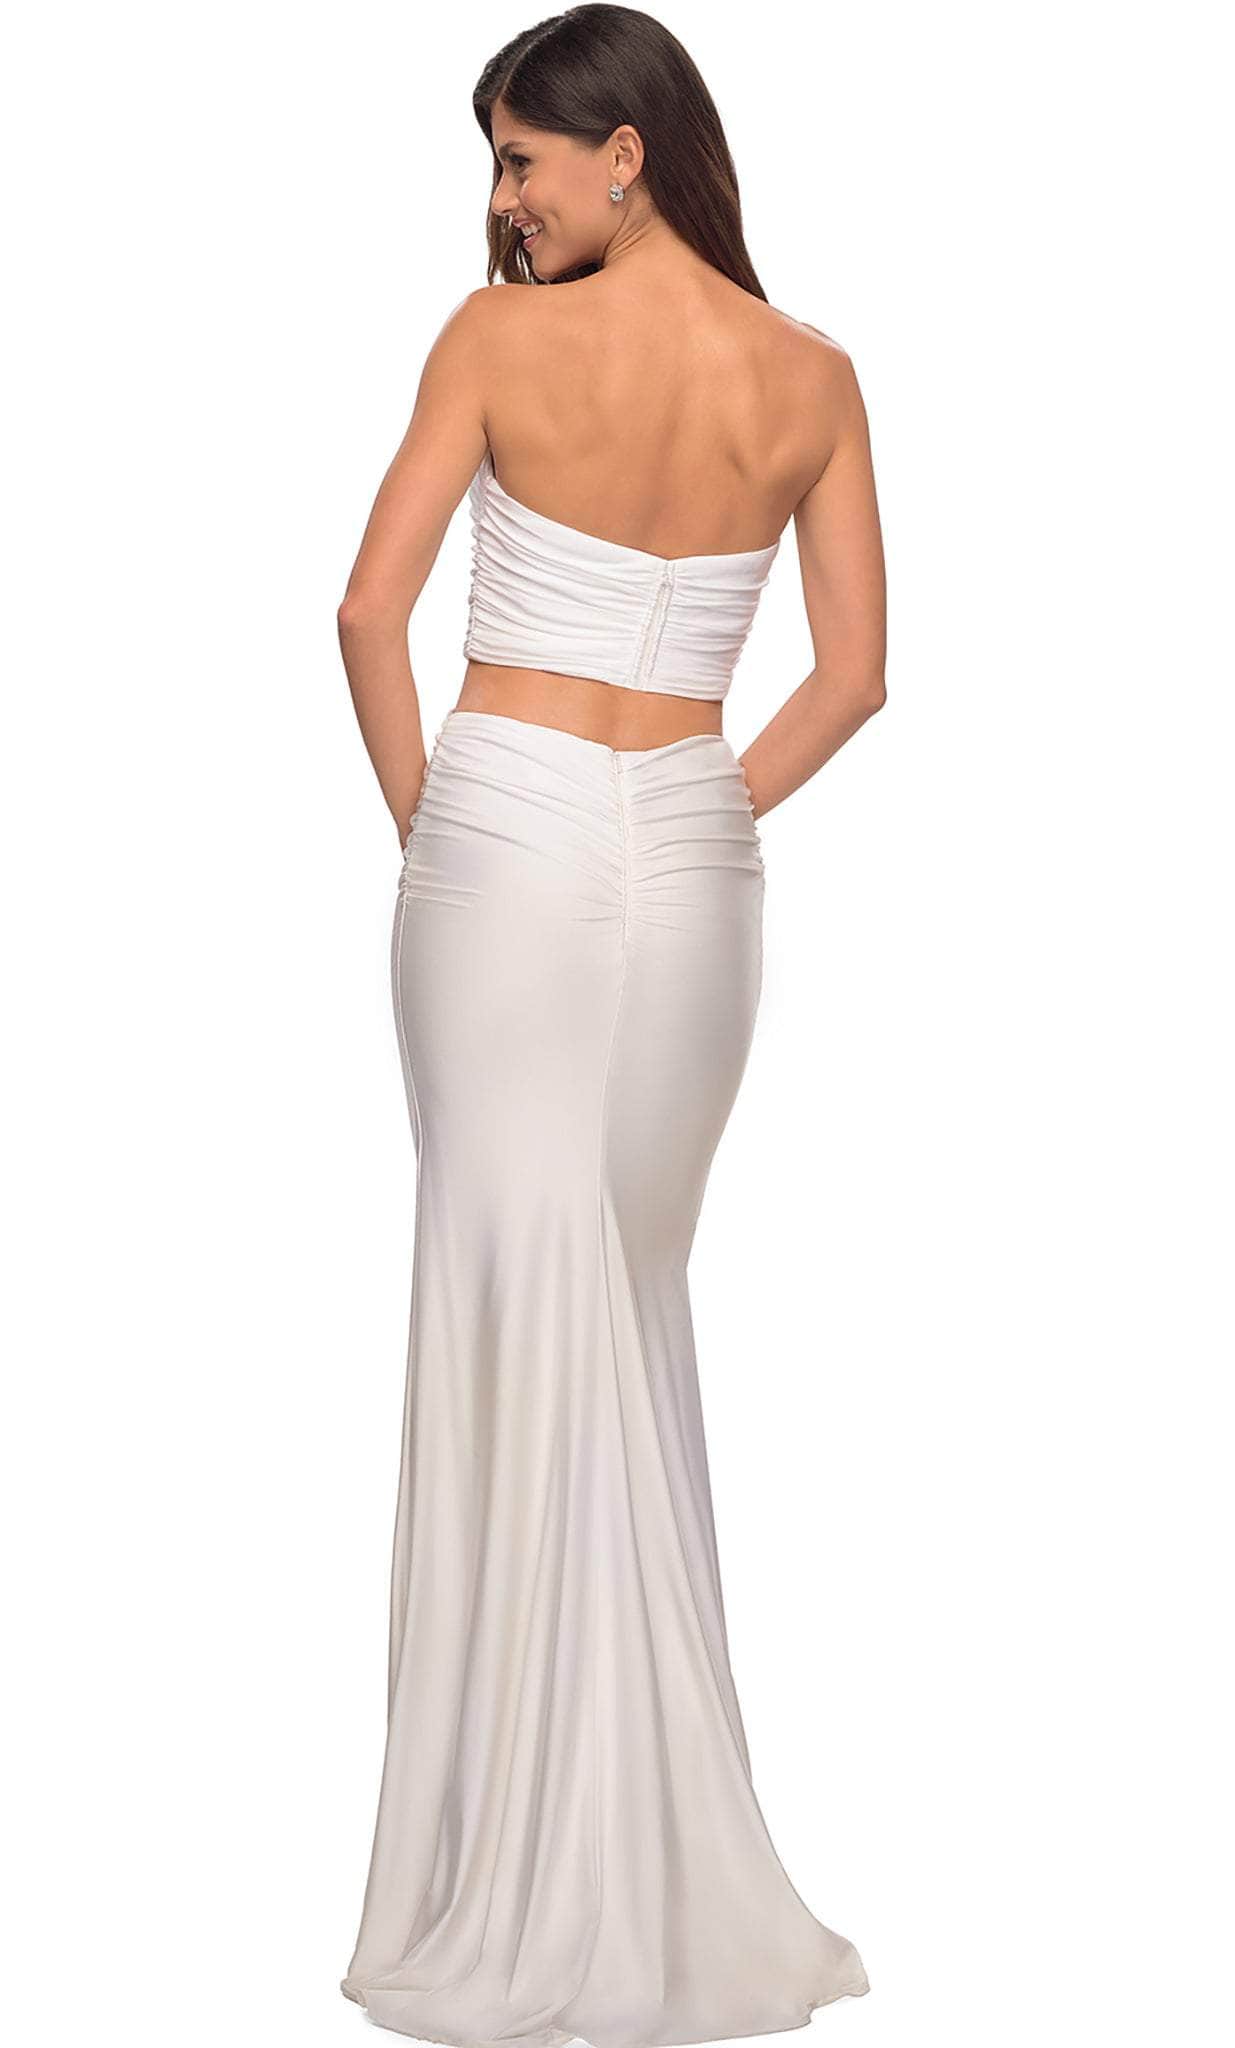 Just Quella Women's Summer Cover Up Strapless India | Ubuy